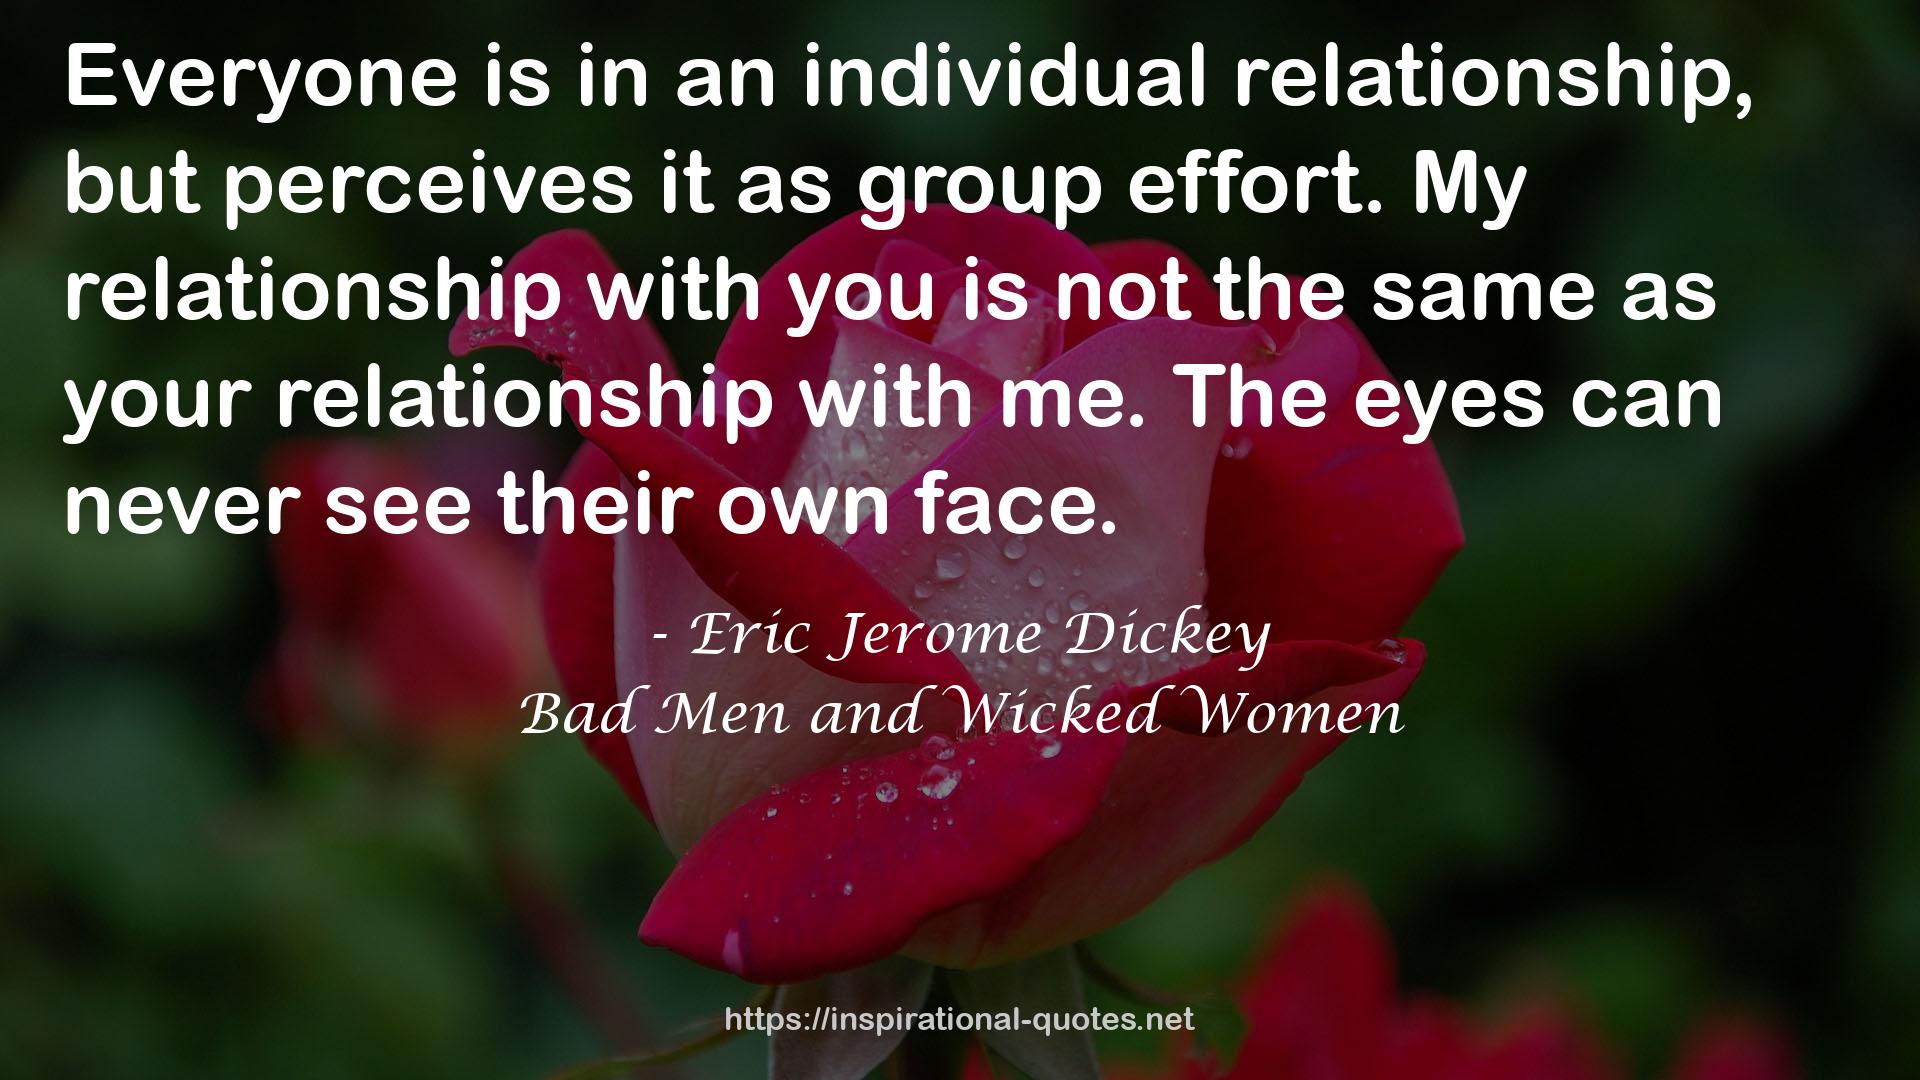 Bad Men and Wicked Women QUOTES